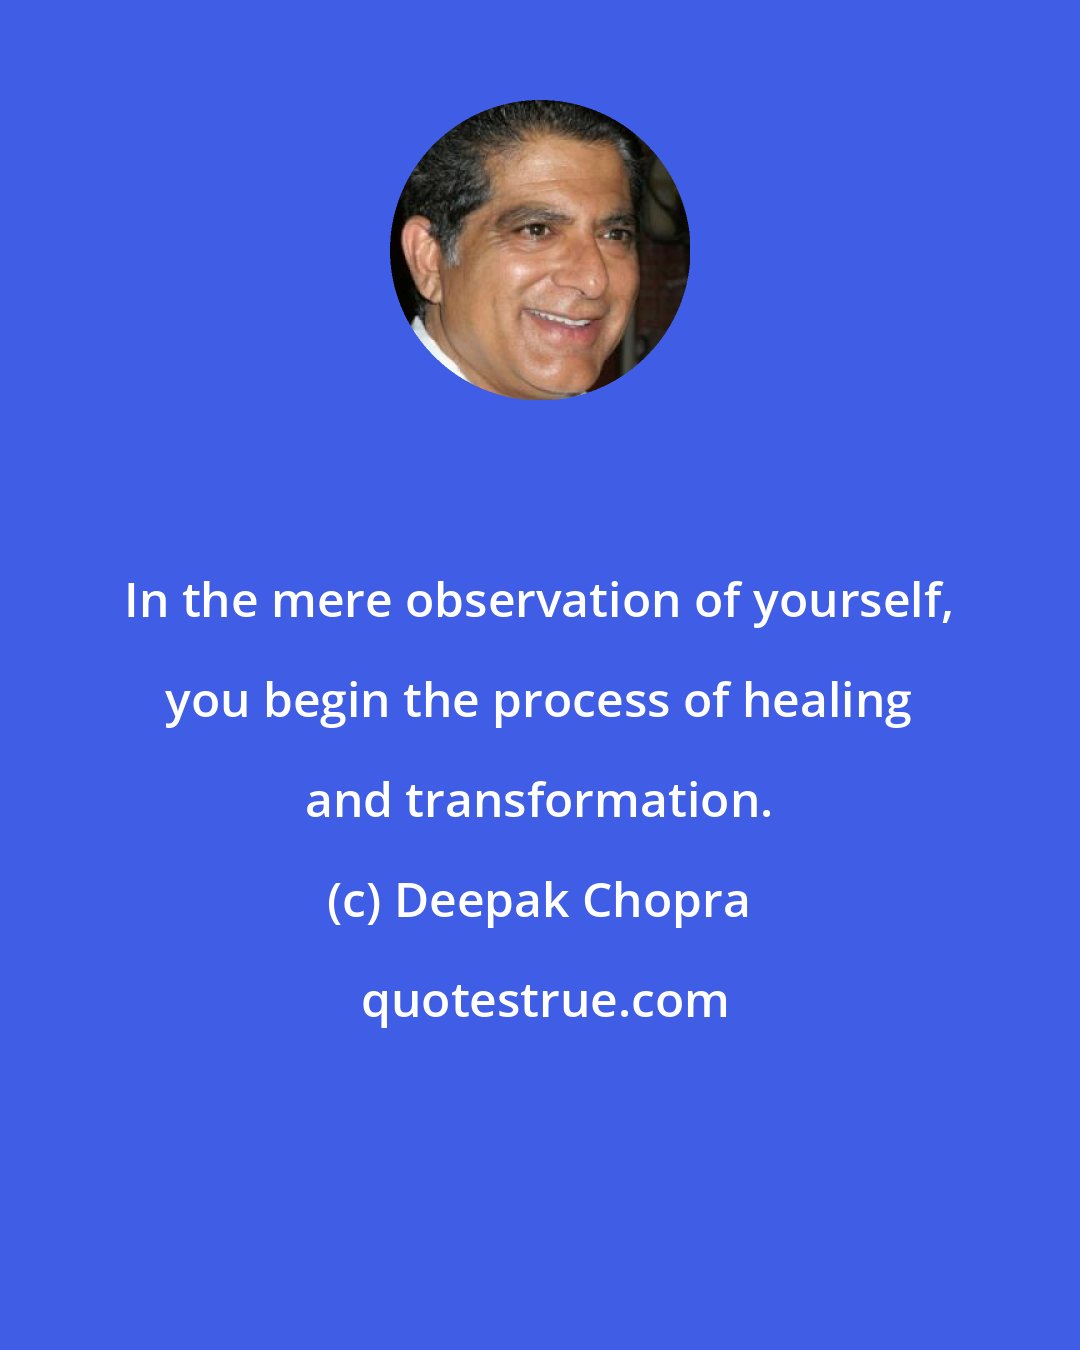 Deepak Chopra: In the mere observation of yourself, you begin the process of healing and transformation.